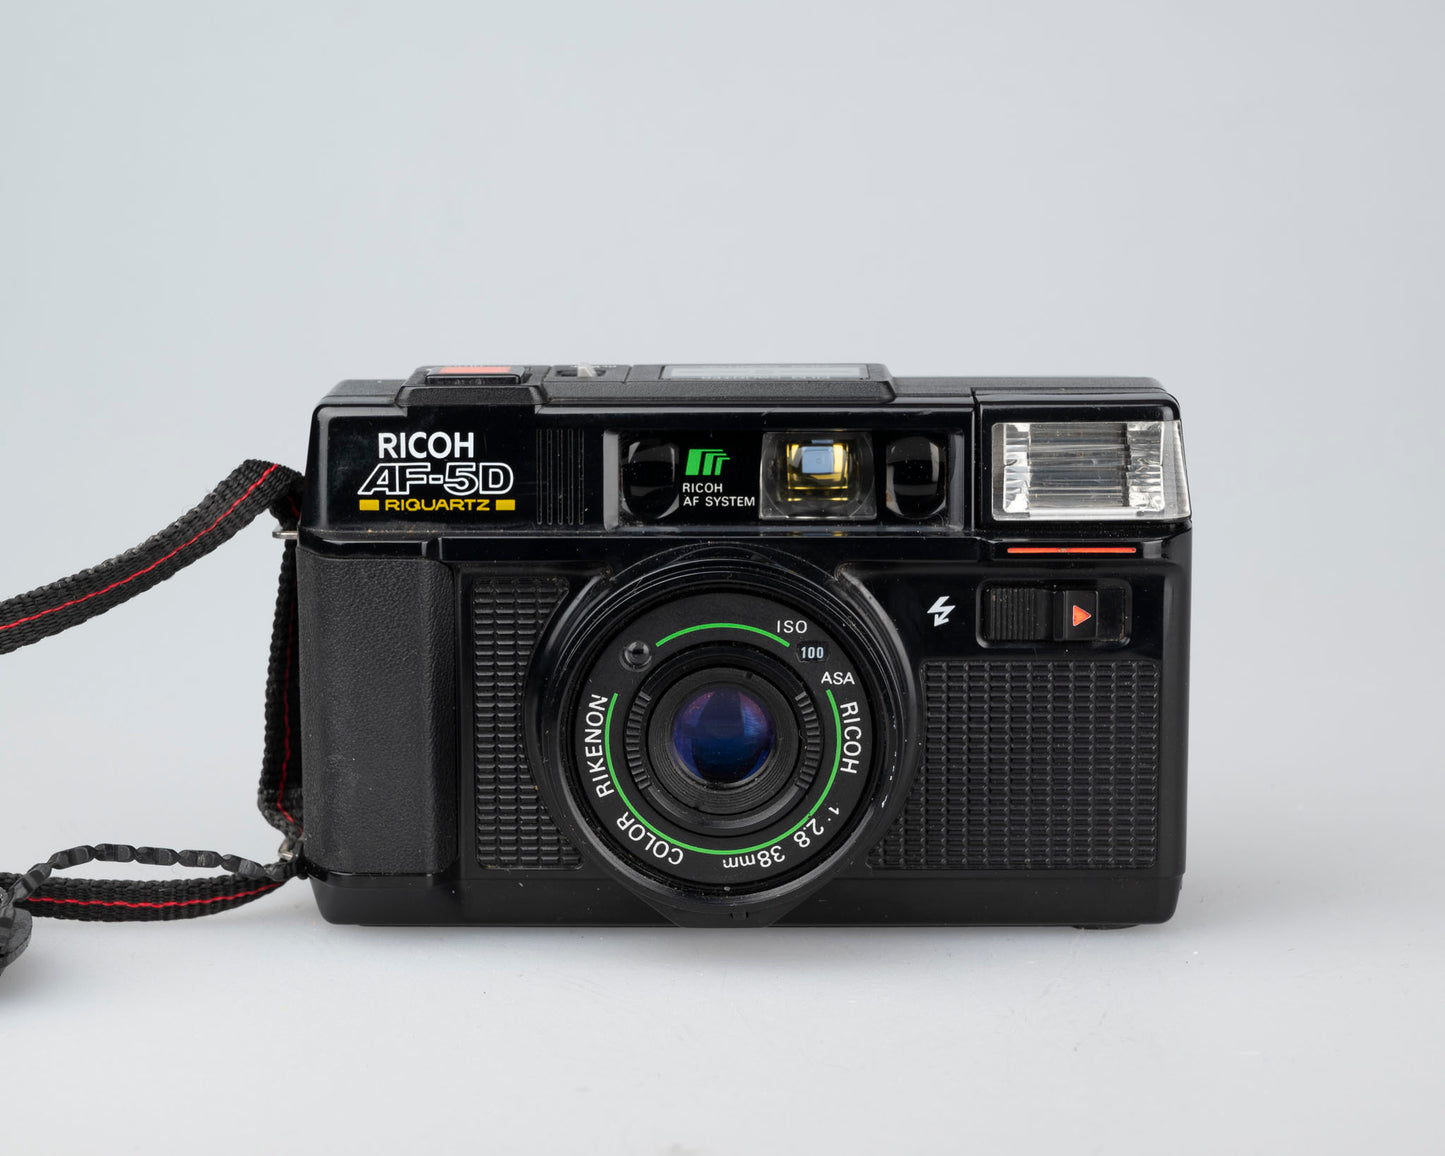 This film-tested Ricoh AF-5D 35mm film camera is available for purchase at www.newwavepool.shop